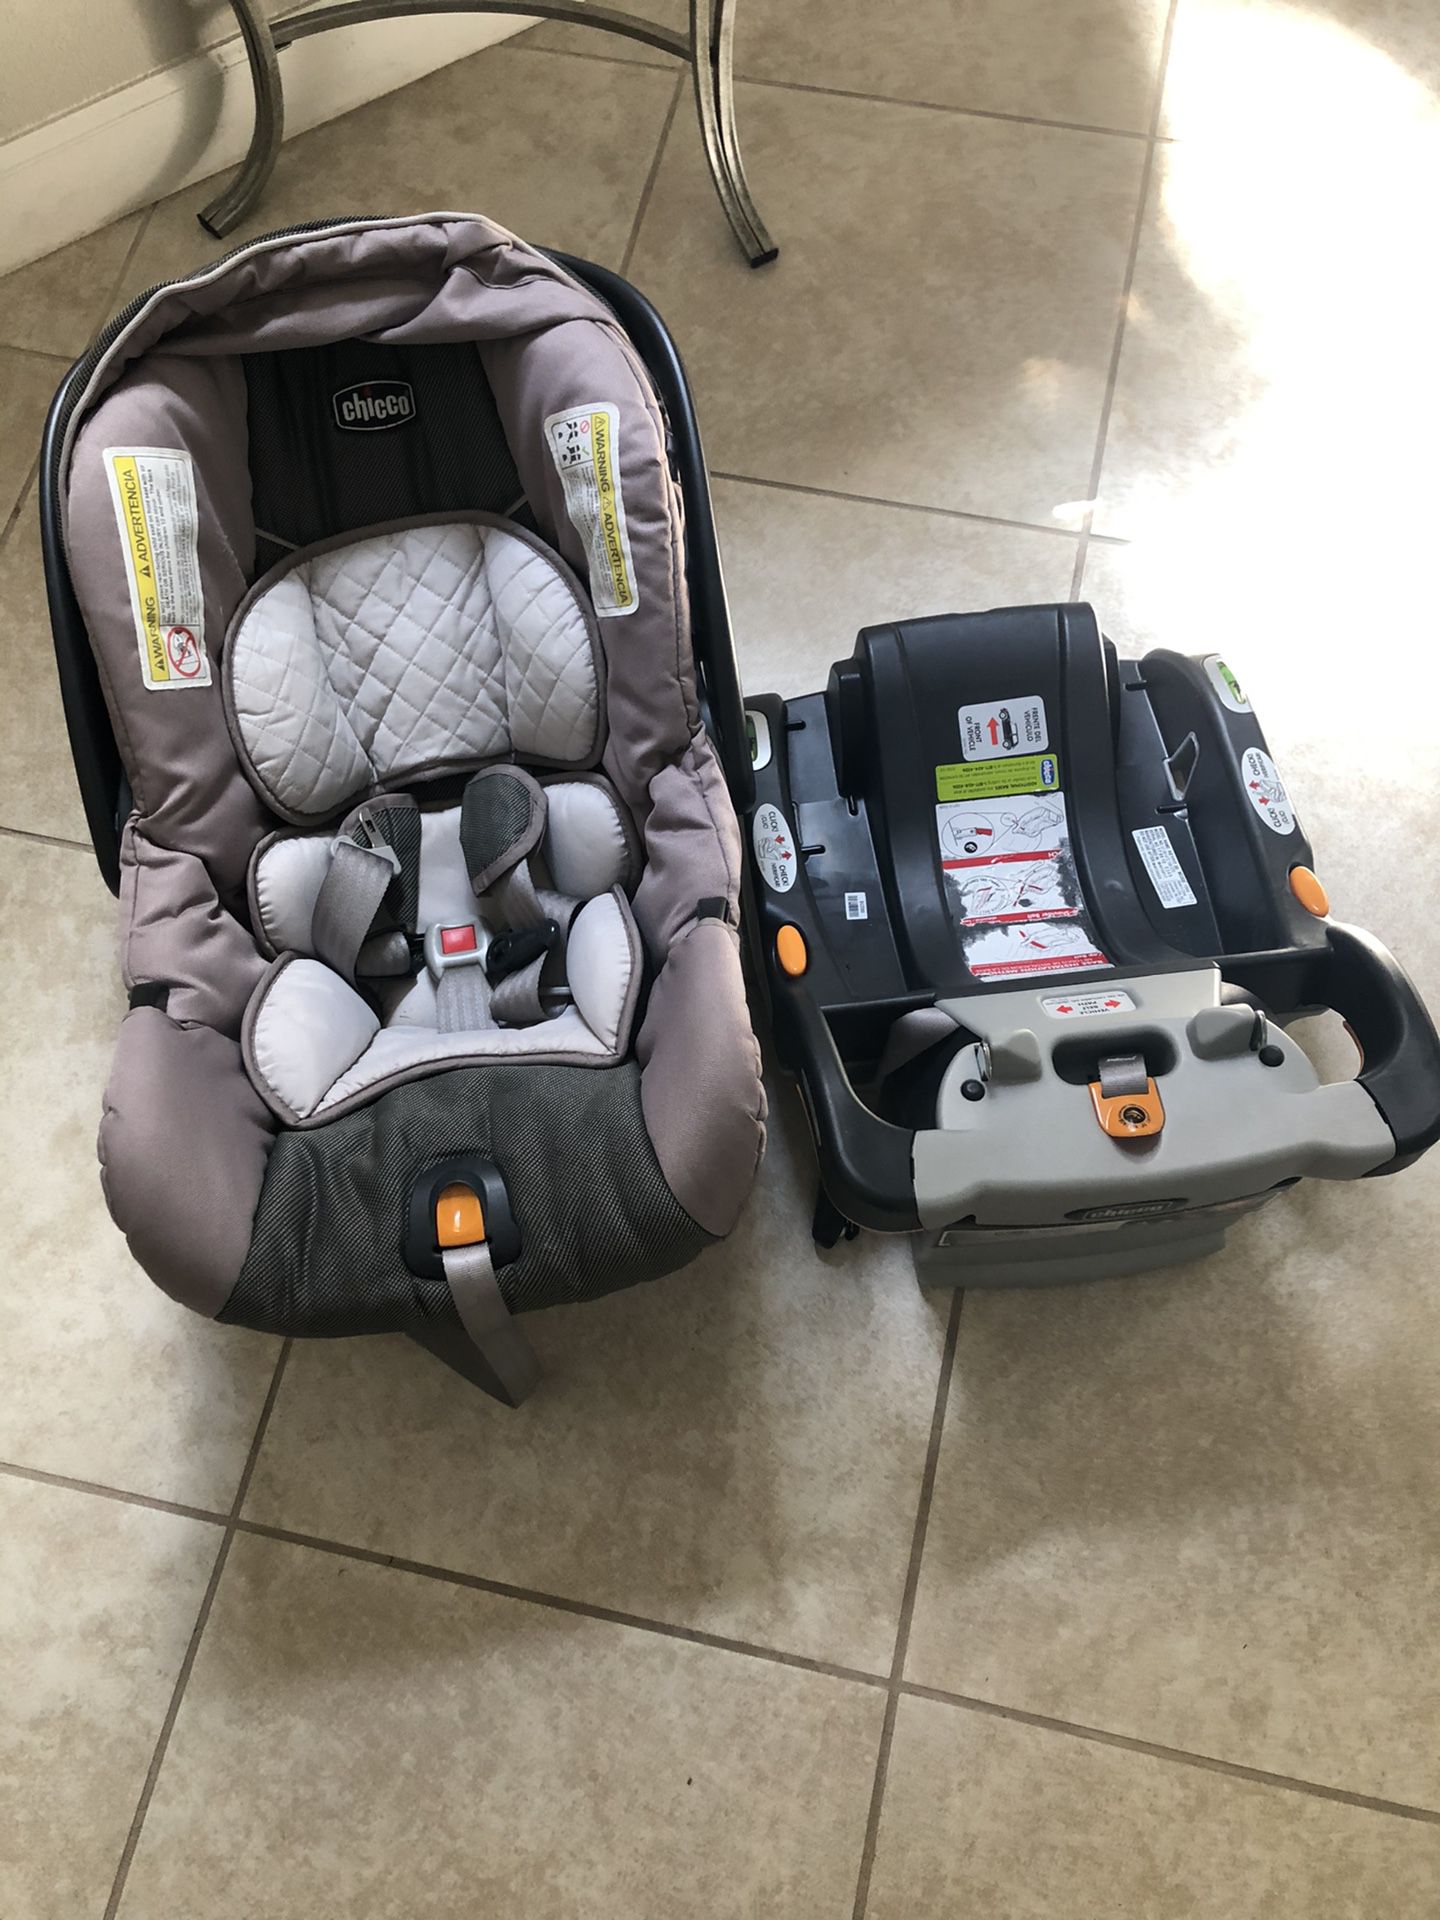 Chicco Keyfit 30 infant car seat with base